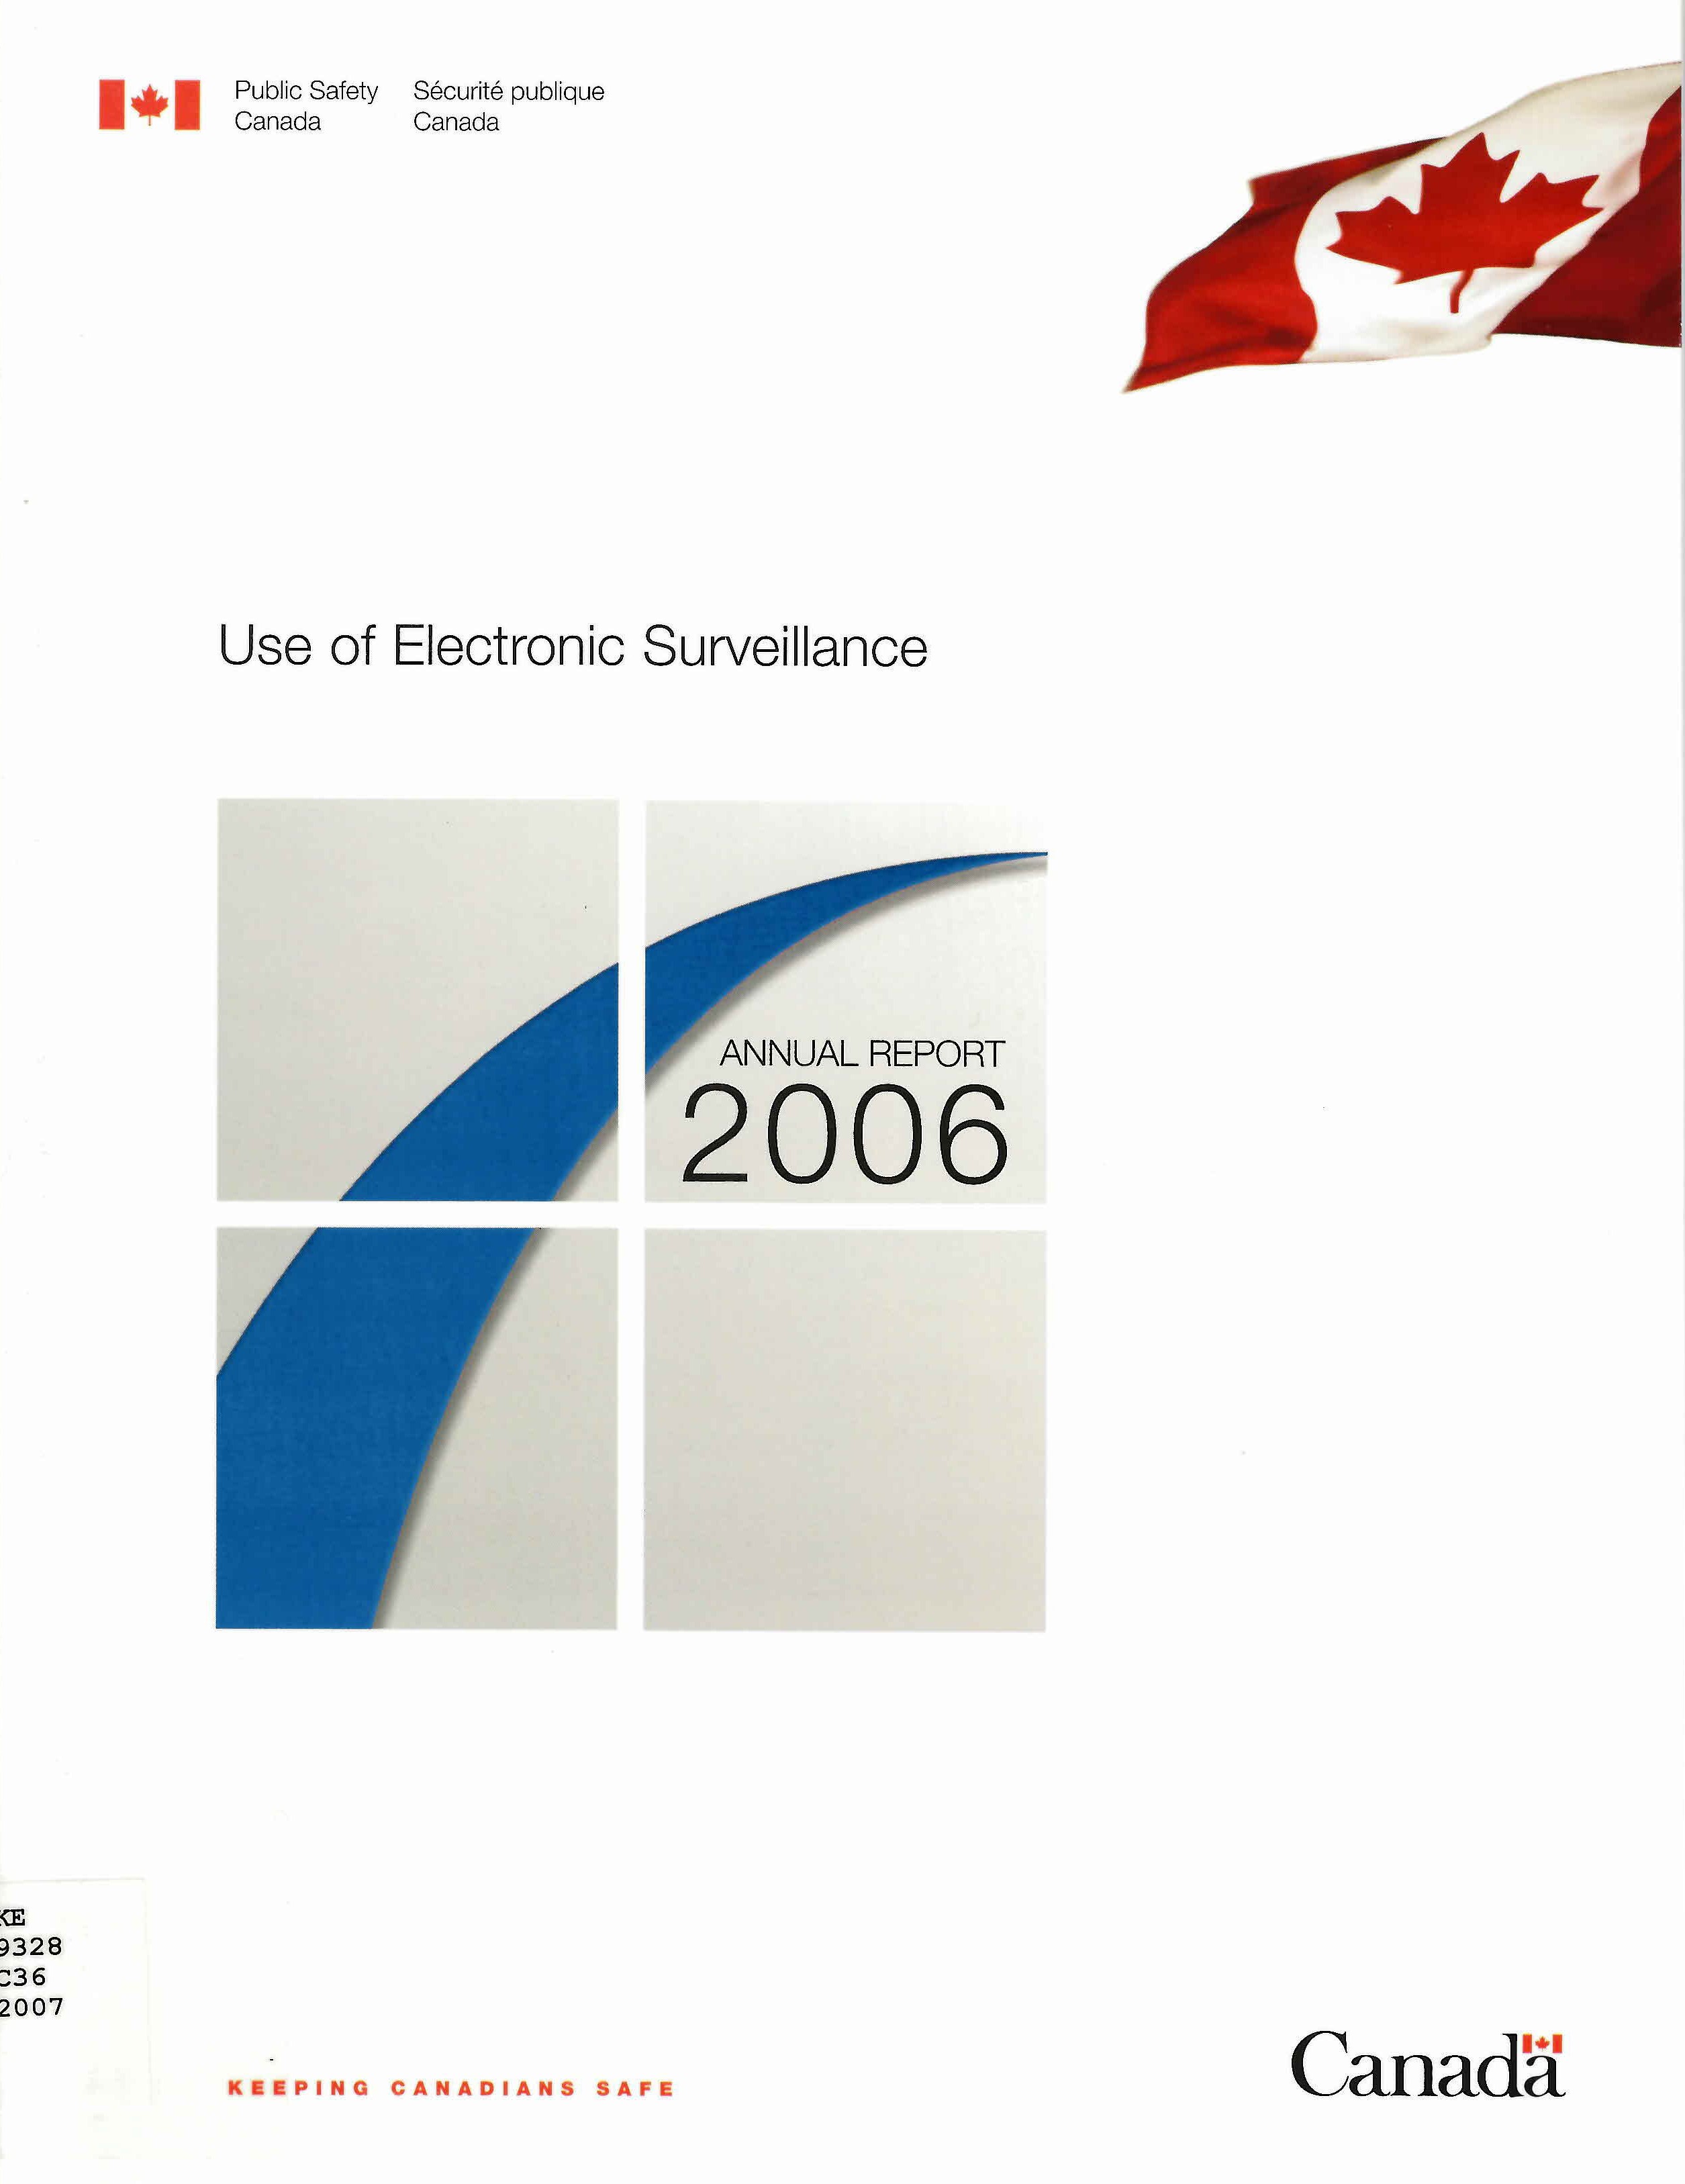 Use of electronic surveillance, annual report